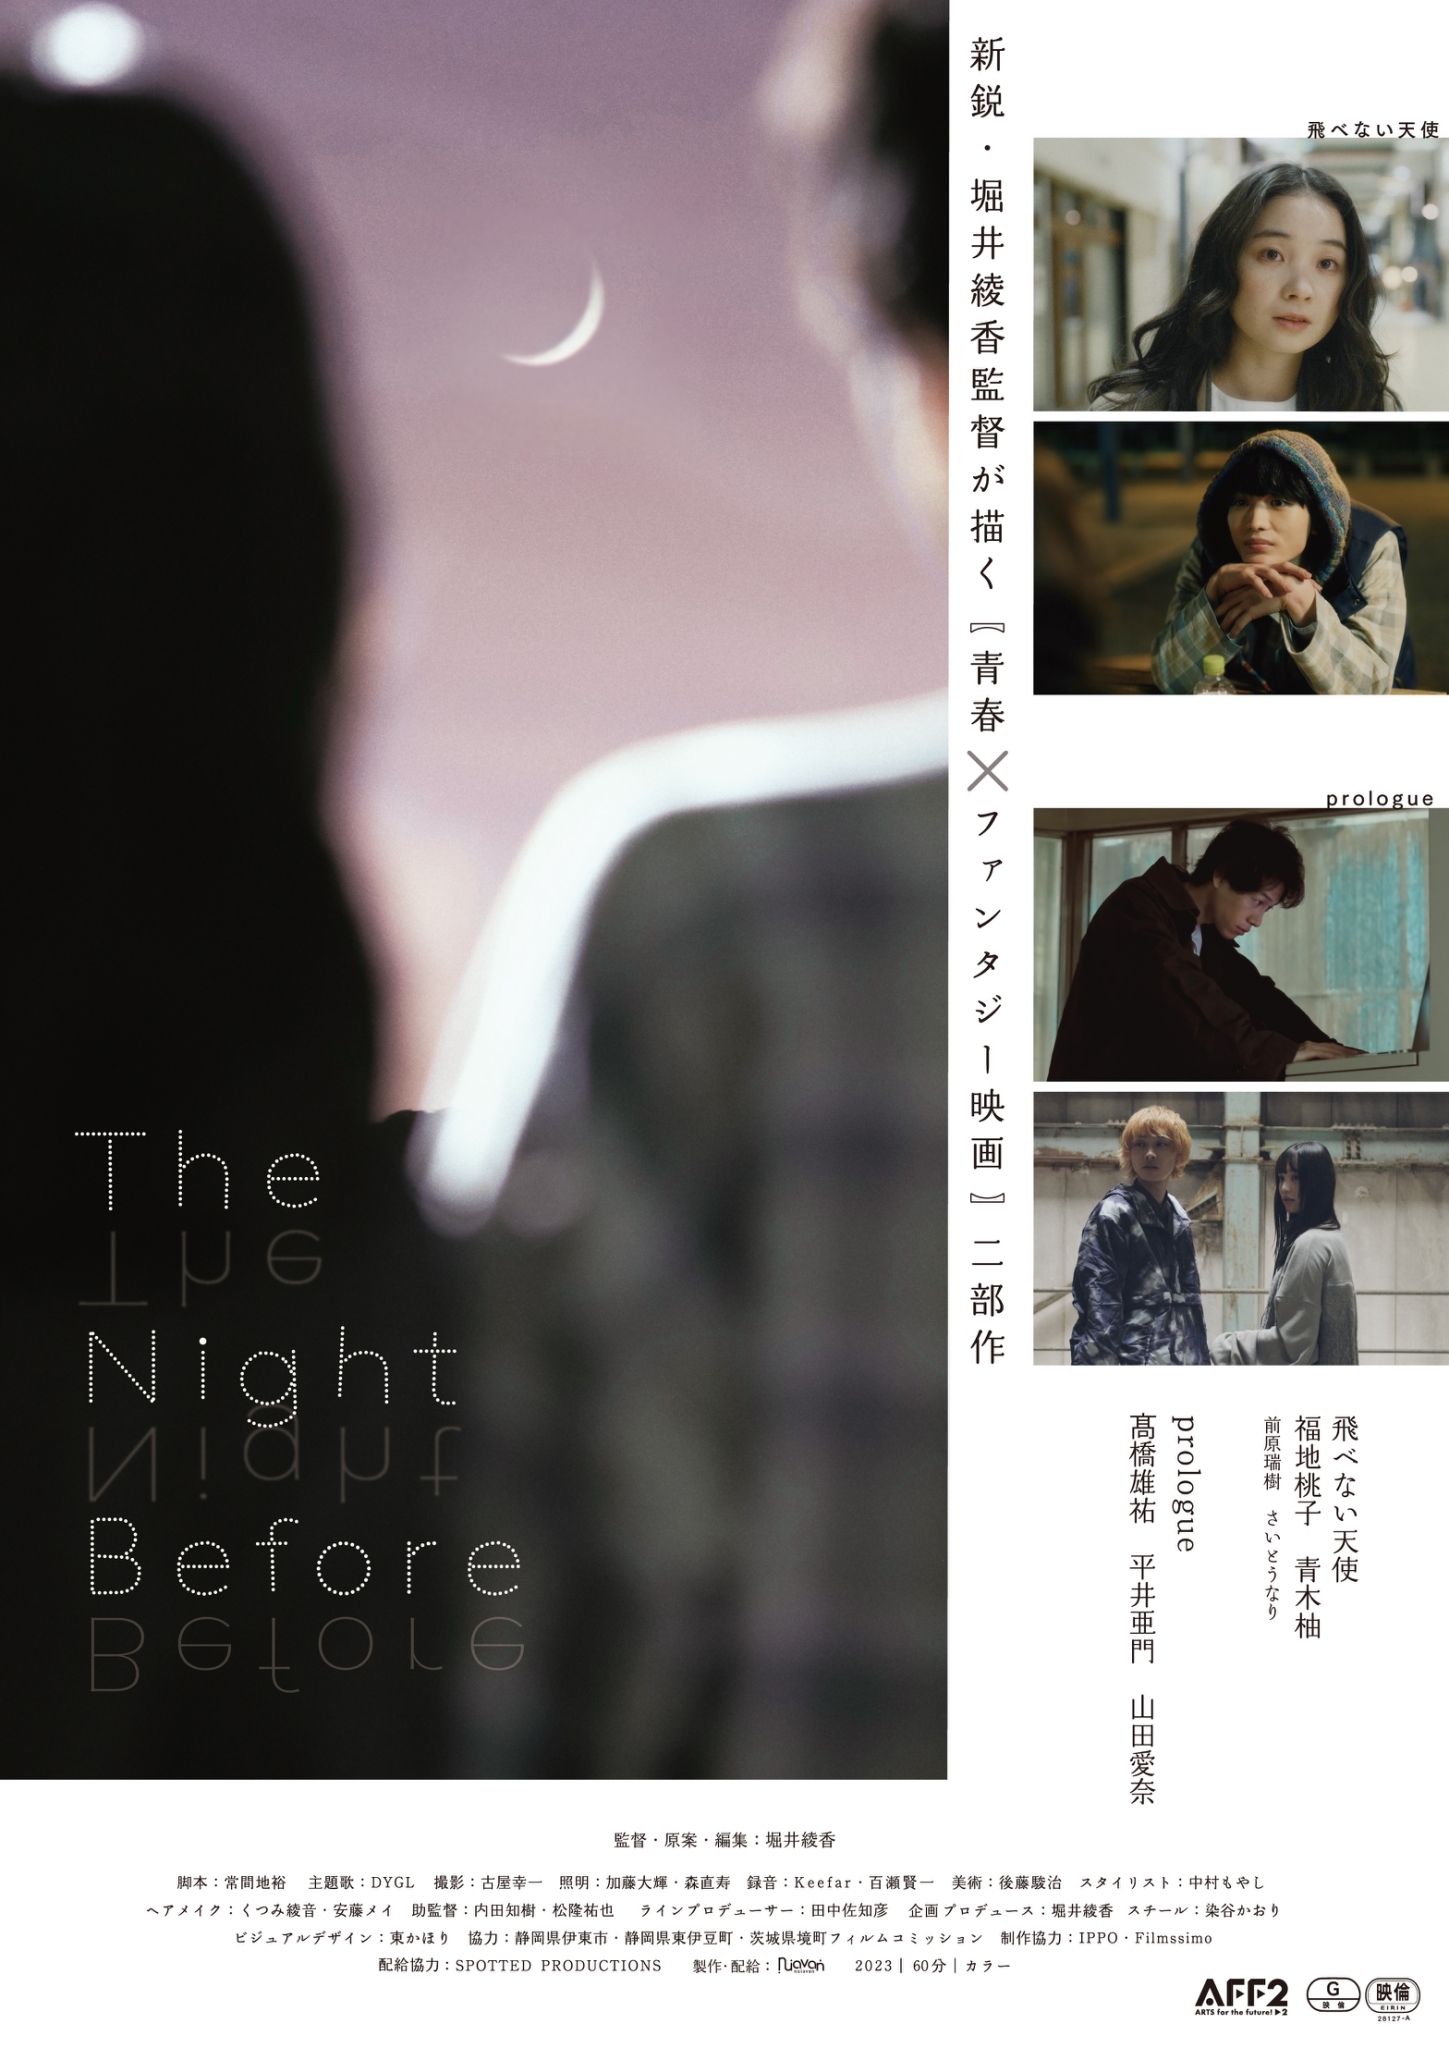 「The Night Before（ザ・ナイト・ビフォー）」